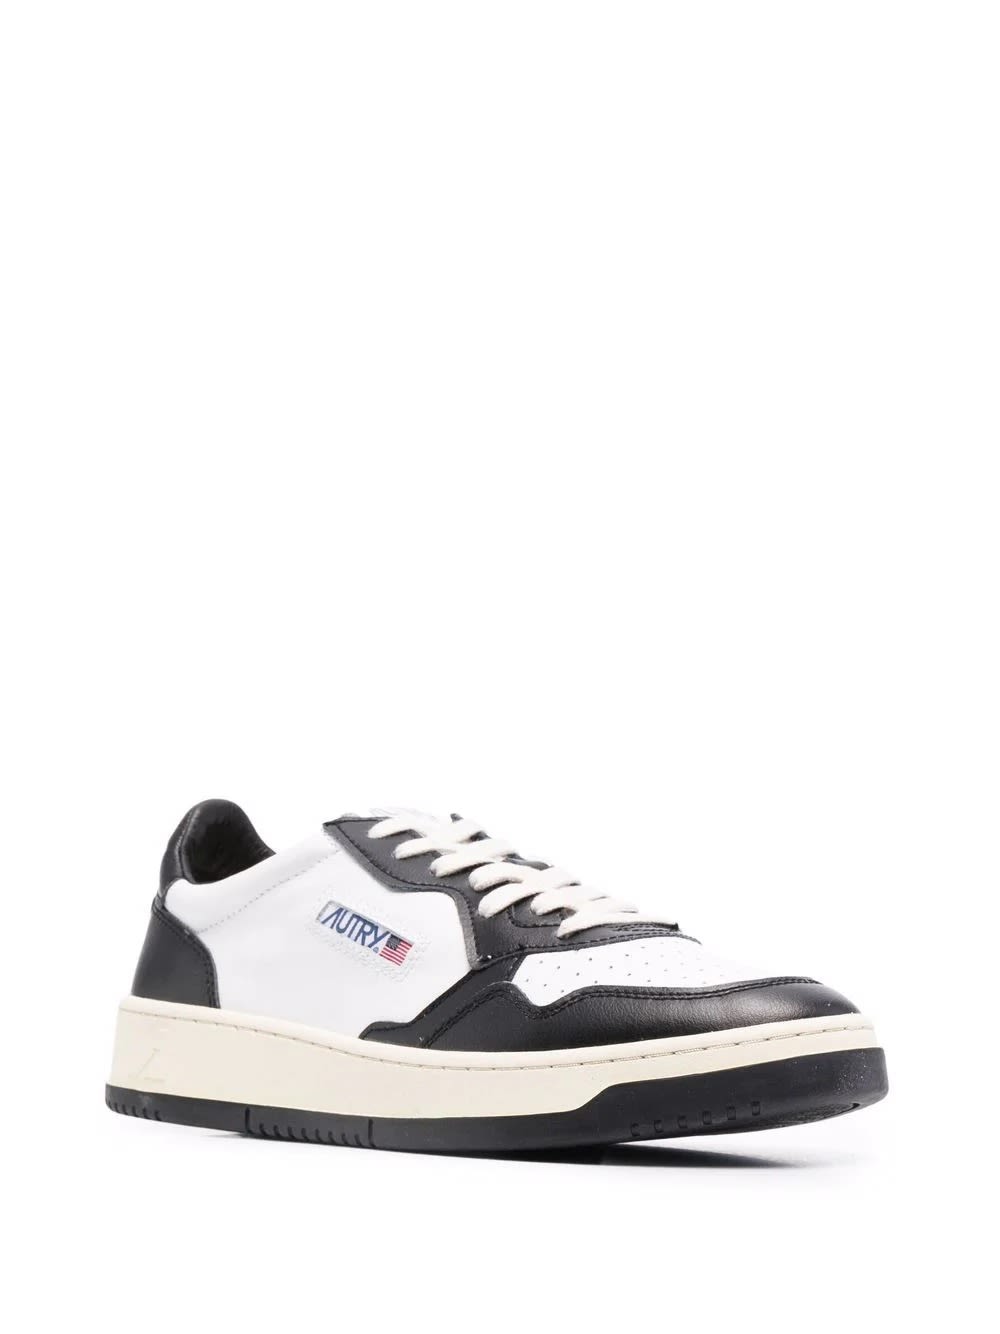 Shop Autry Black And White Two-tone Leather Medalist Low Sneakers